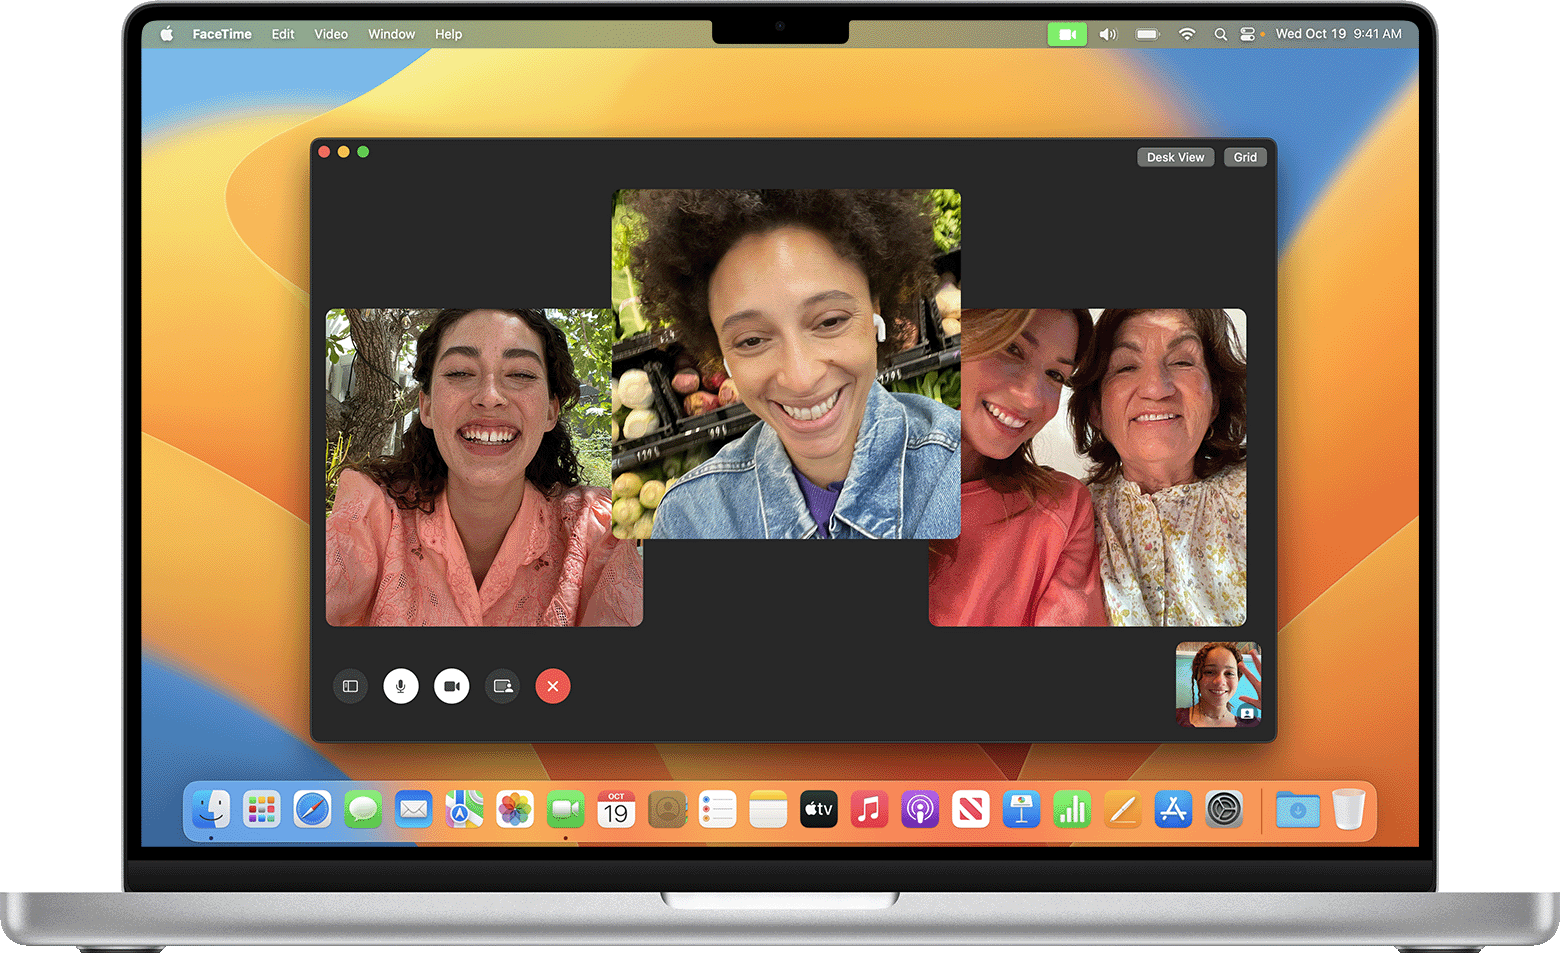 Image of a Group FaceTime call in progress